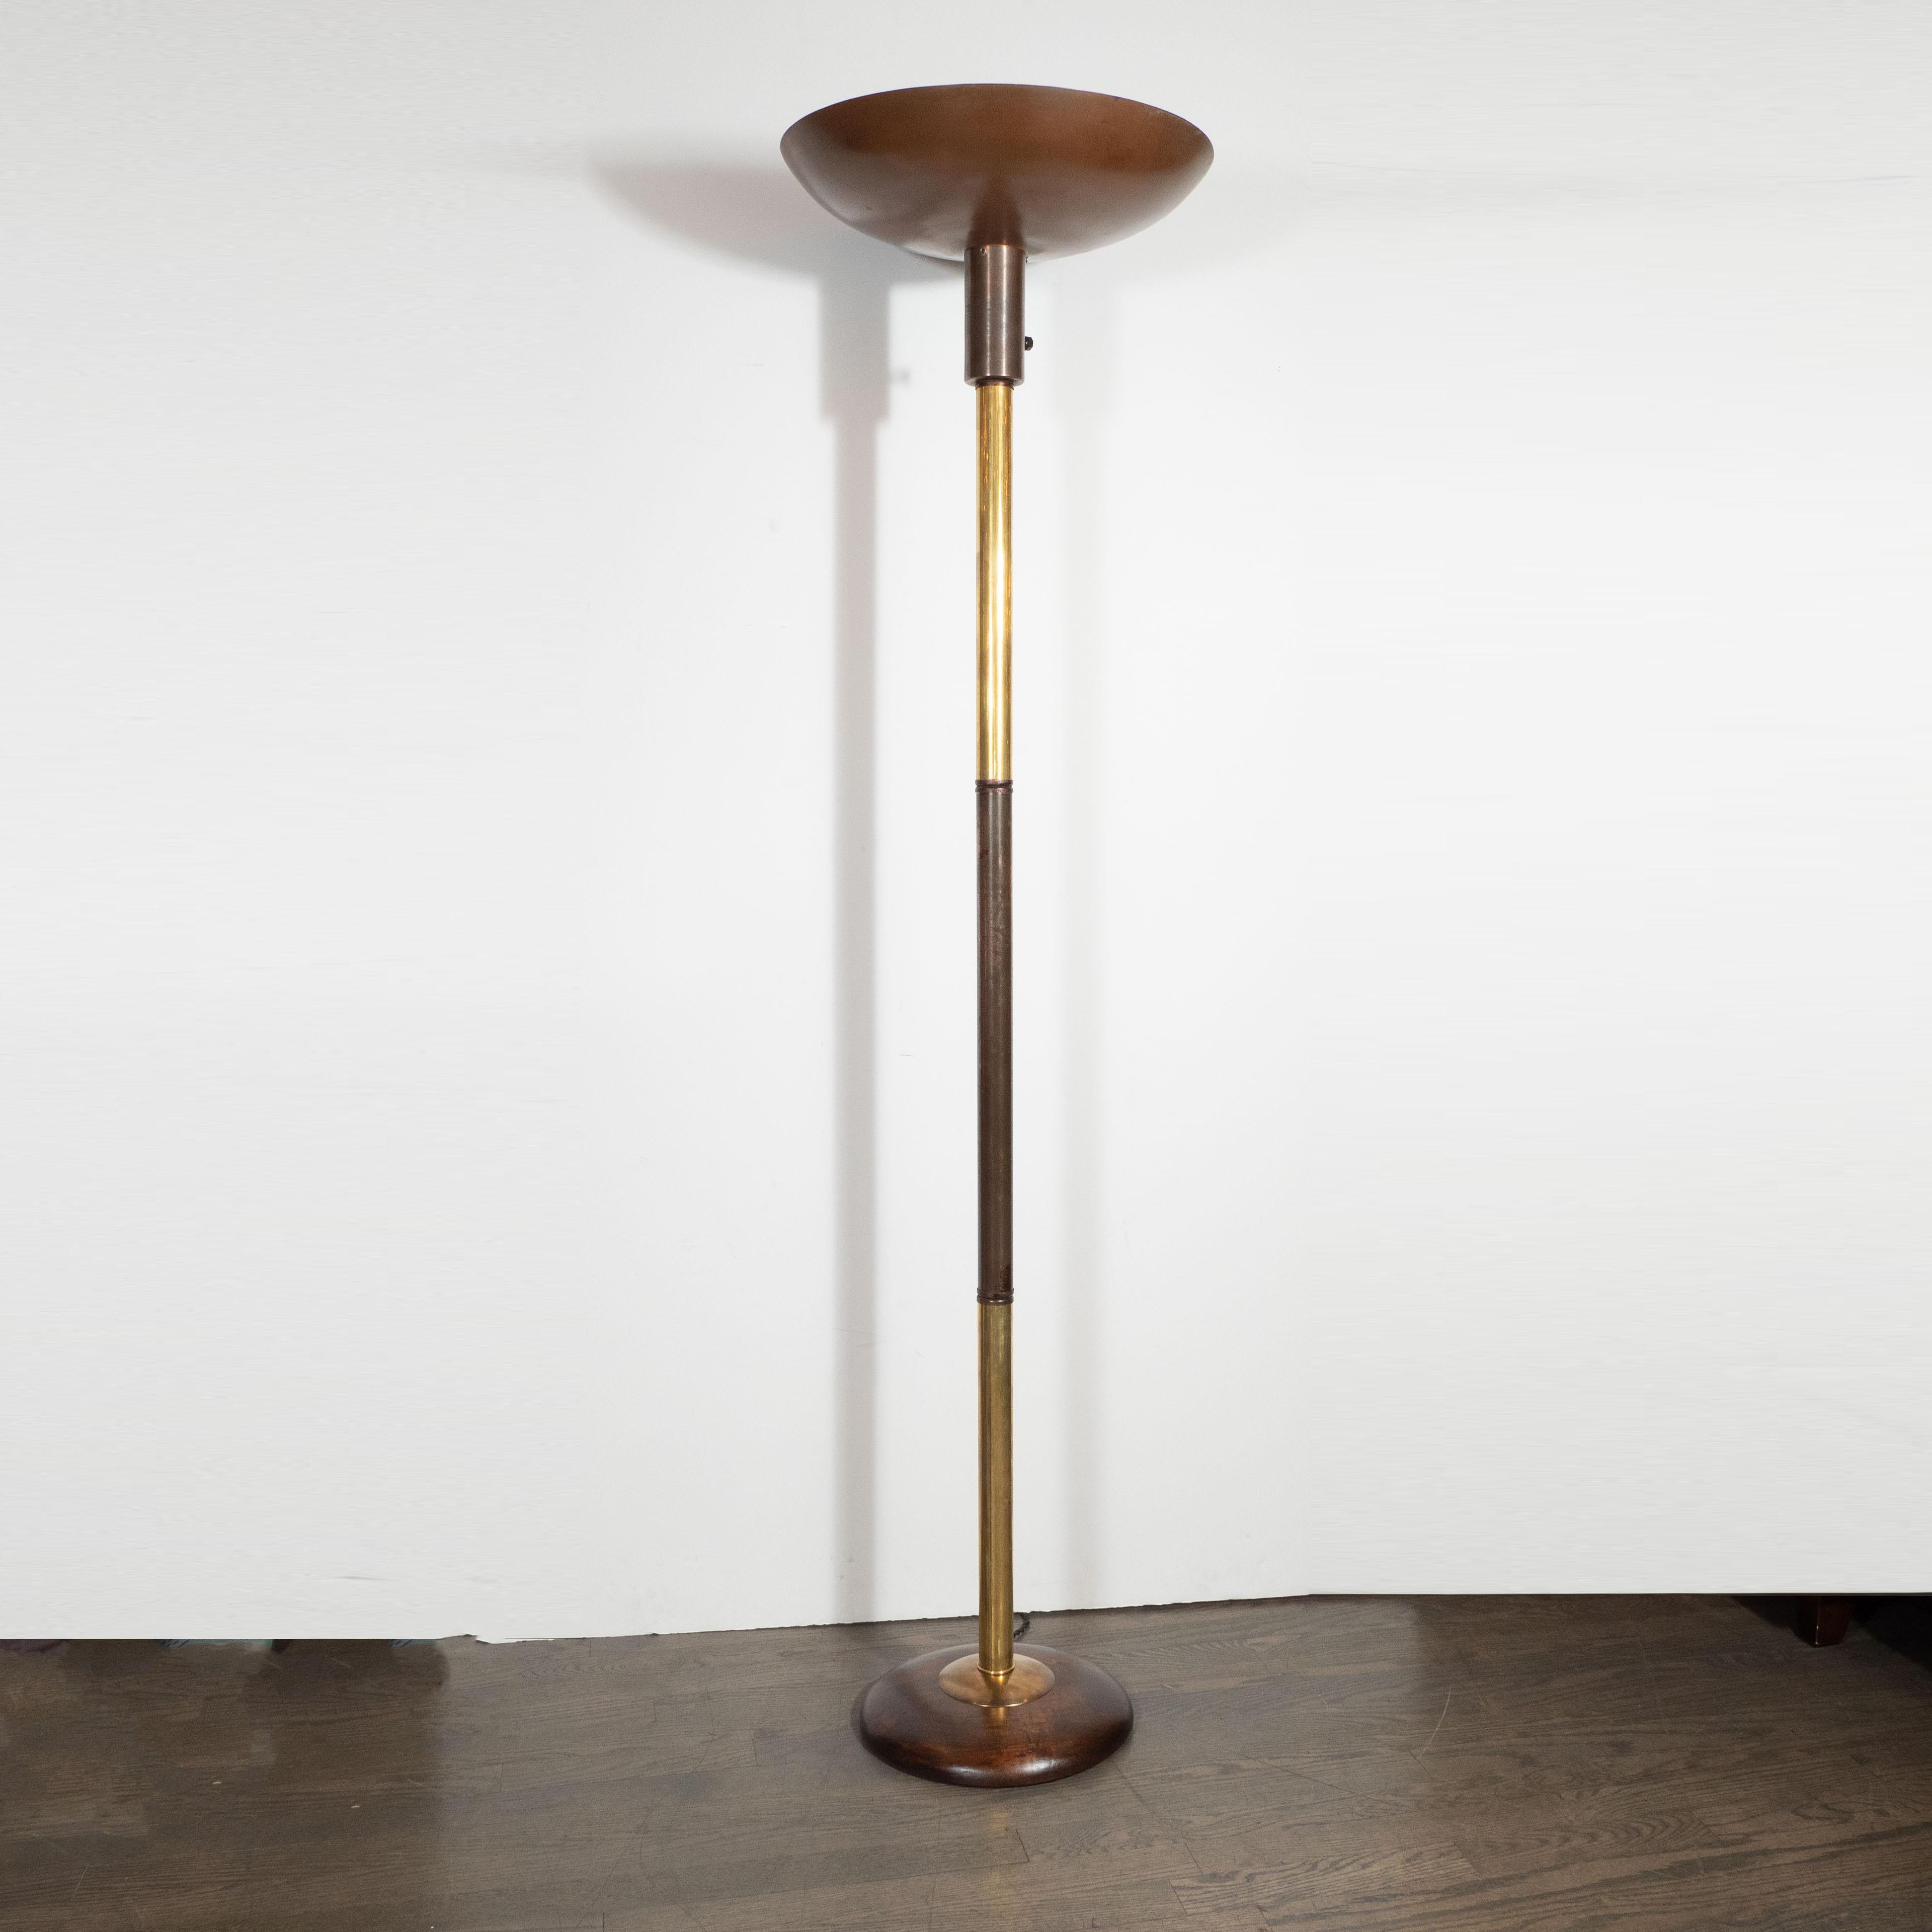 This refined Art Deco Machine Age torchiere was realized by the legendary designer, Russell Wright, in the United States circa 1940. It features a slightly convex circular base from which a central rod in alternating sections of brass and patinated